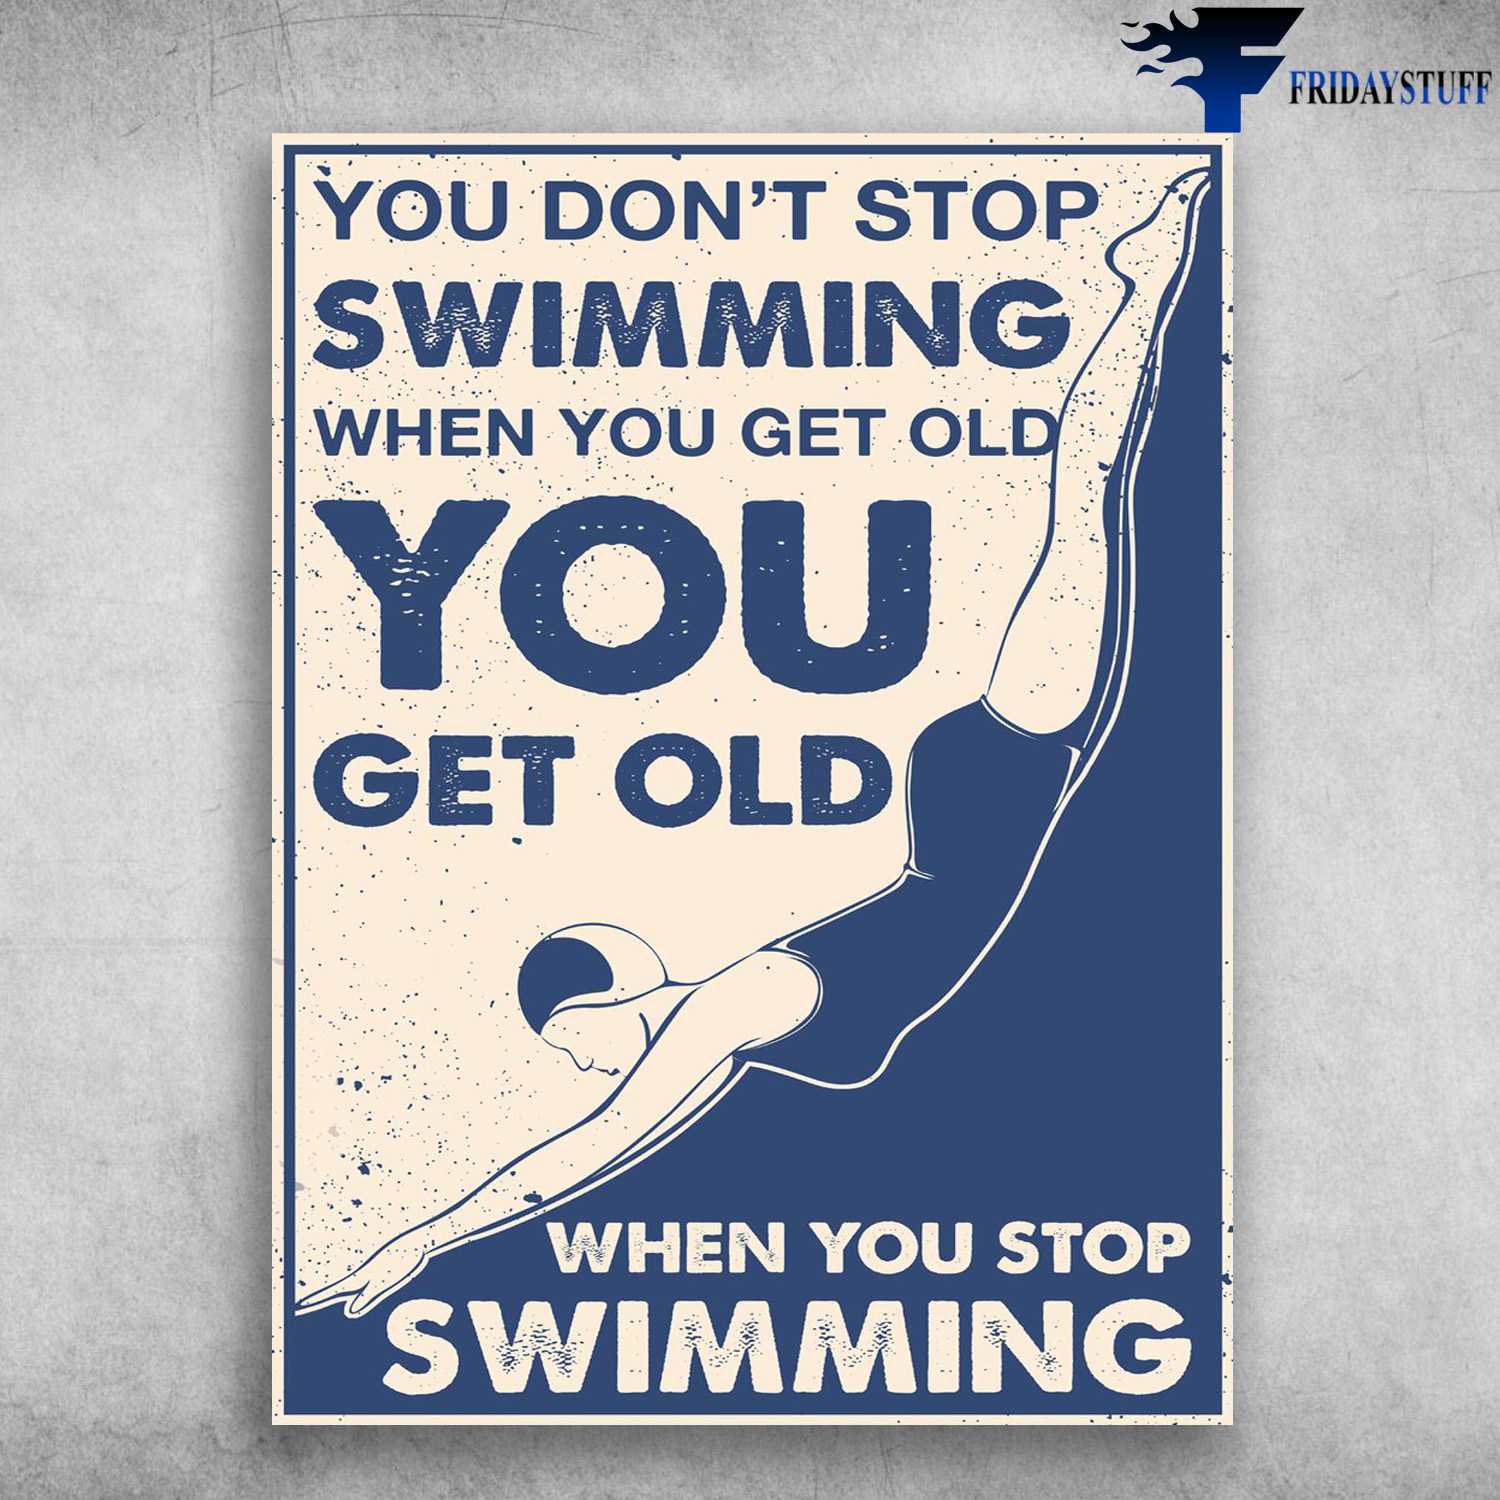 Swimming Poster - You DOn't Stop Swinning When You Get Old, You Get Old When You Swimming